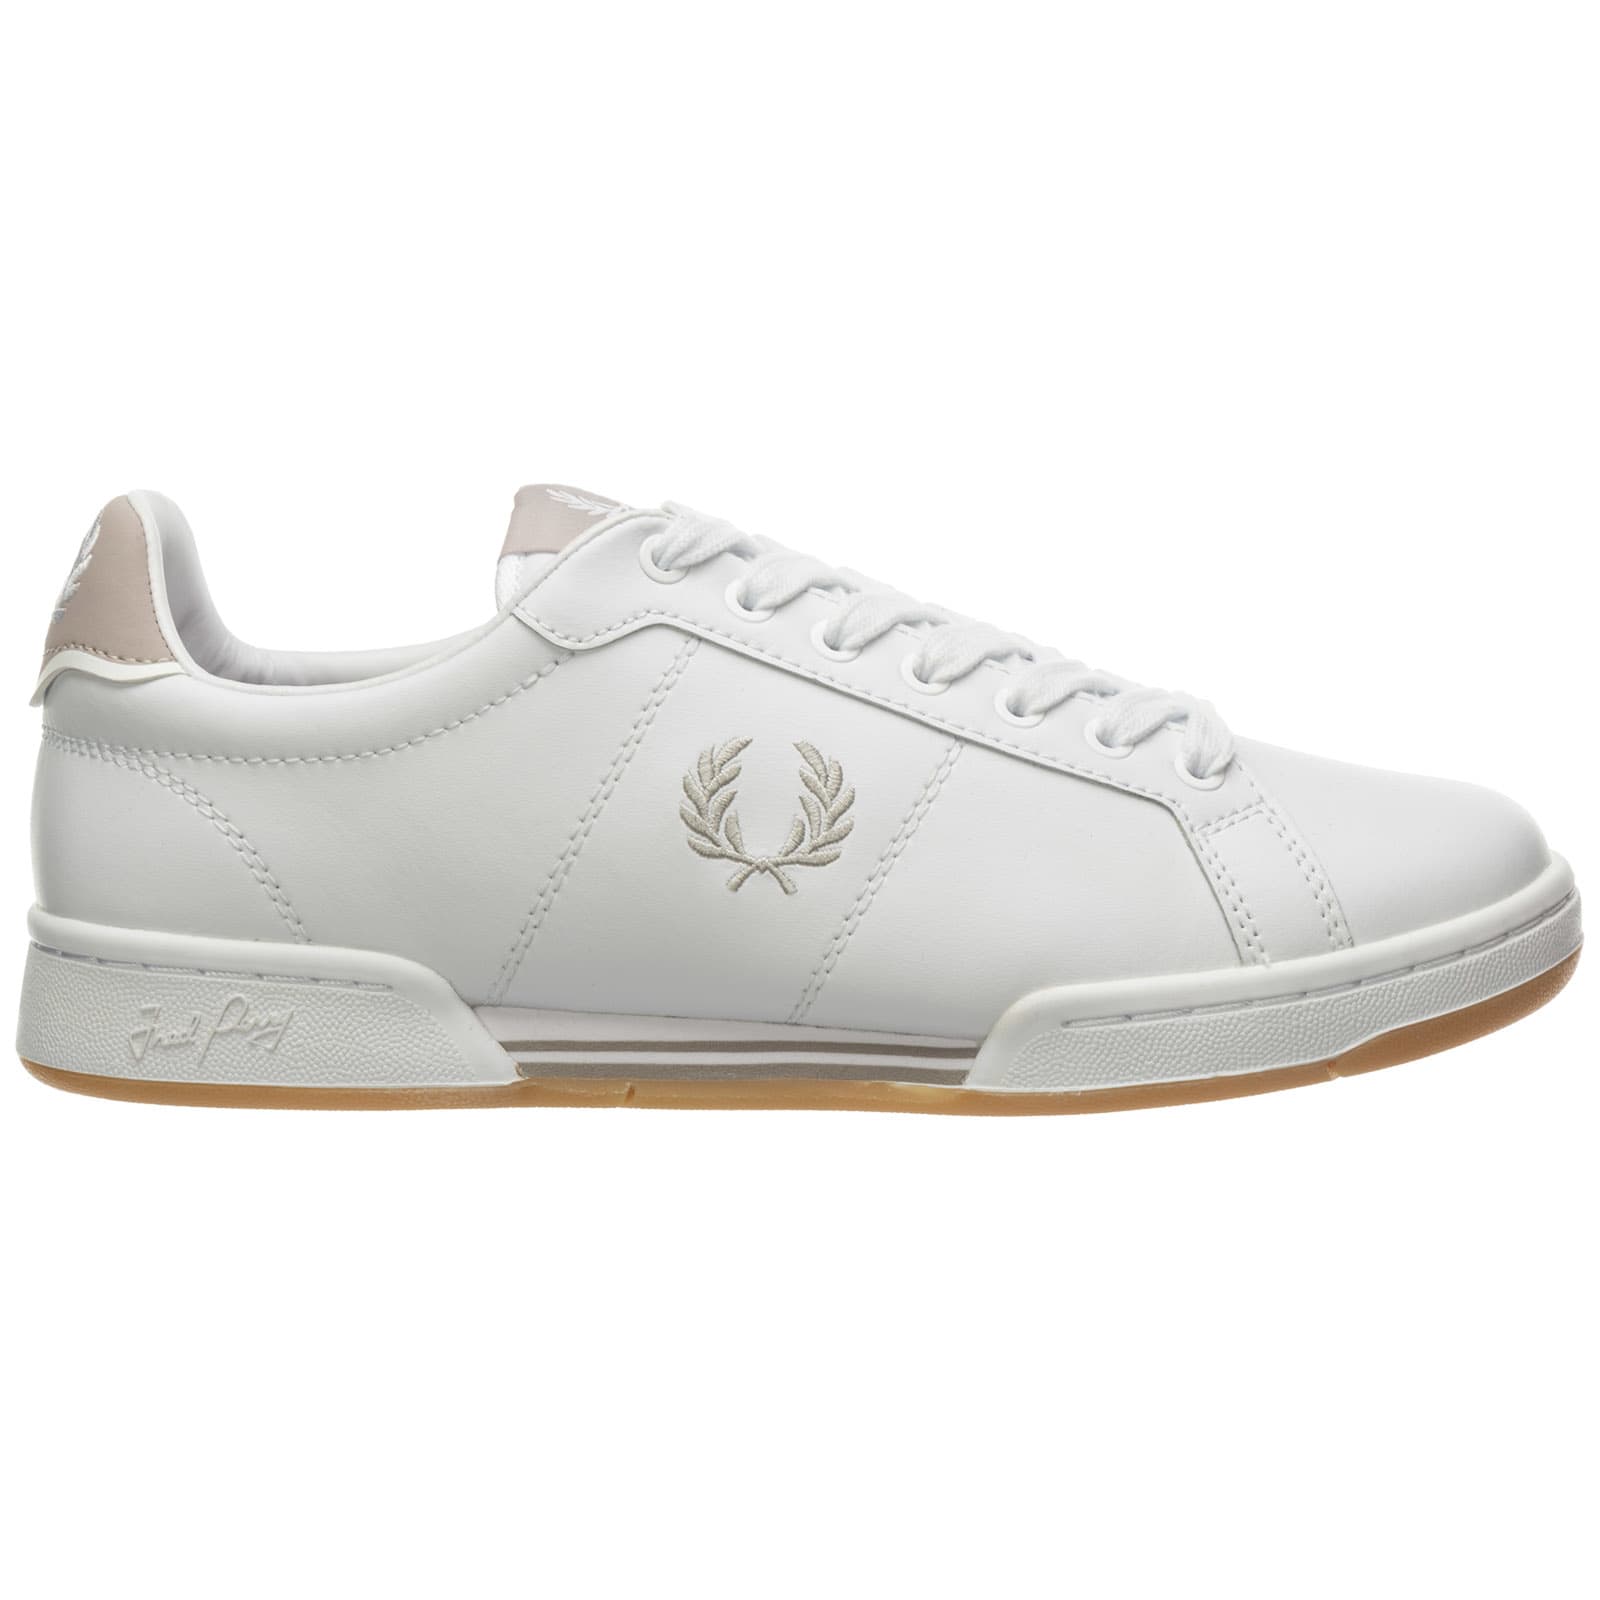 FRED PERRY B722 trainers,11252798